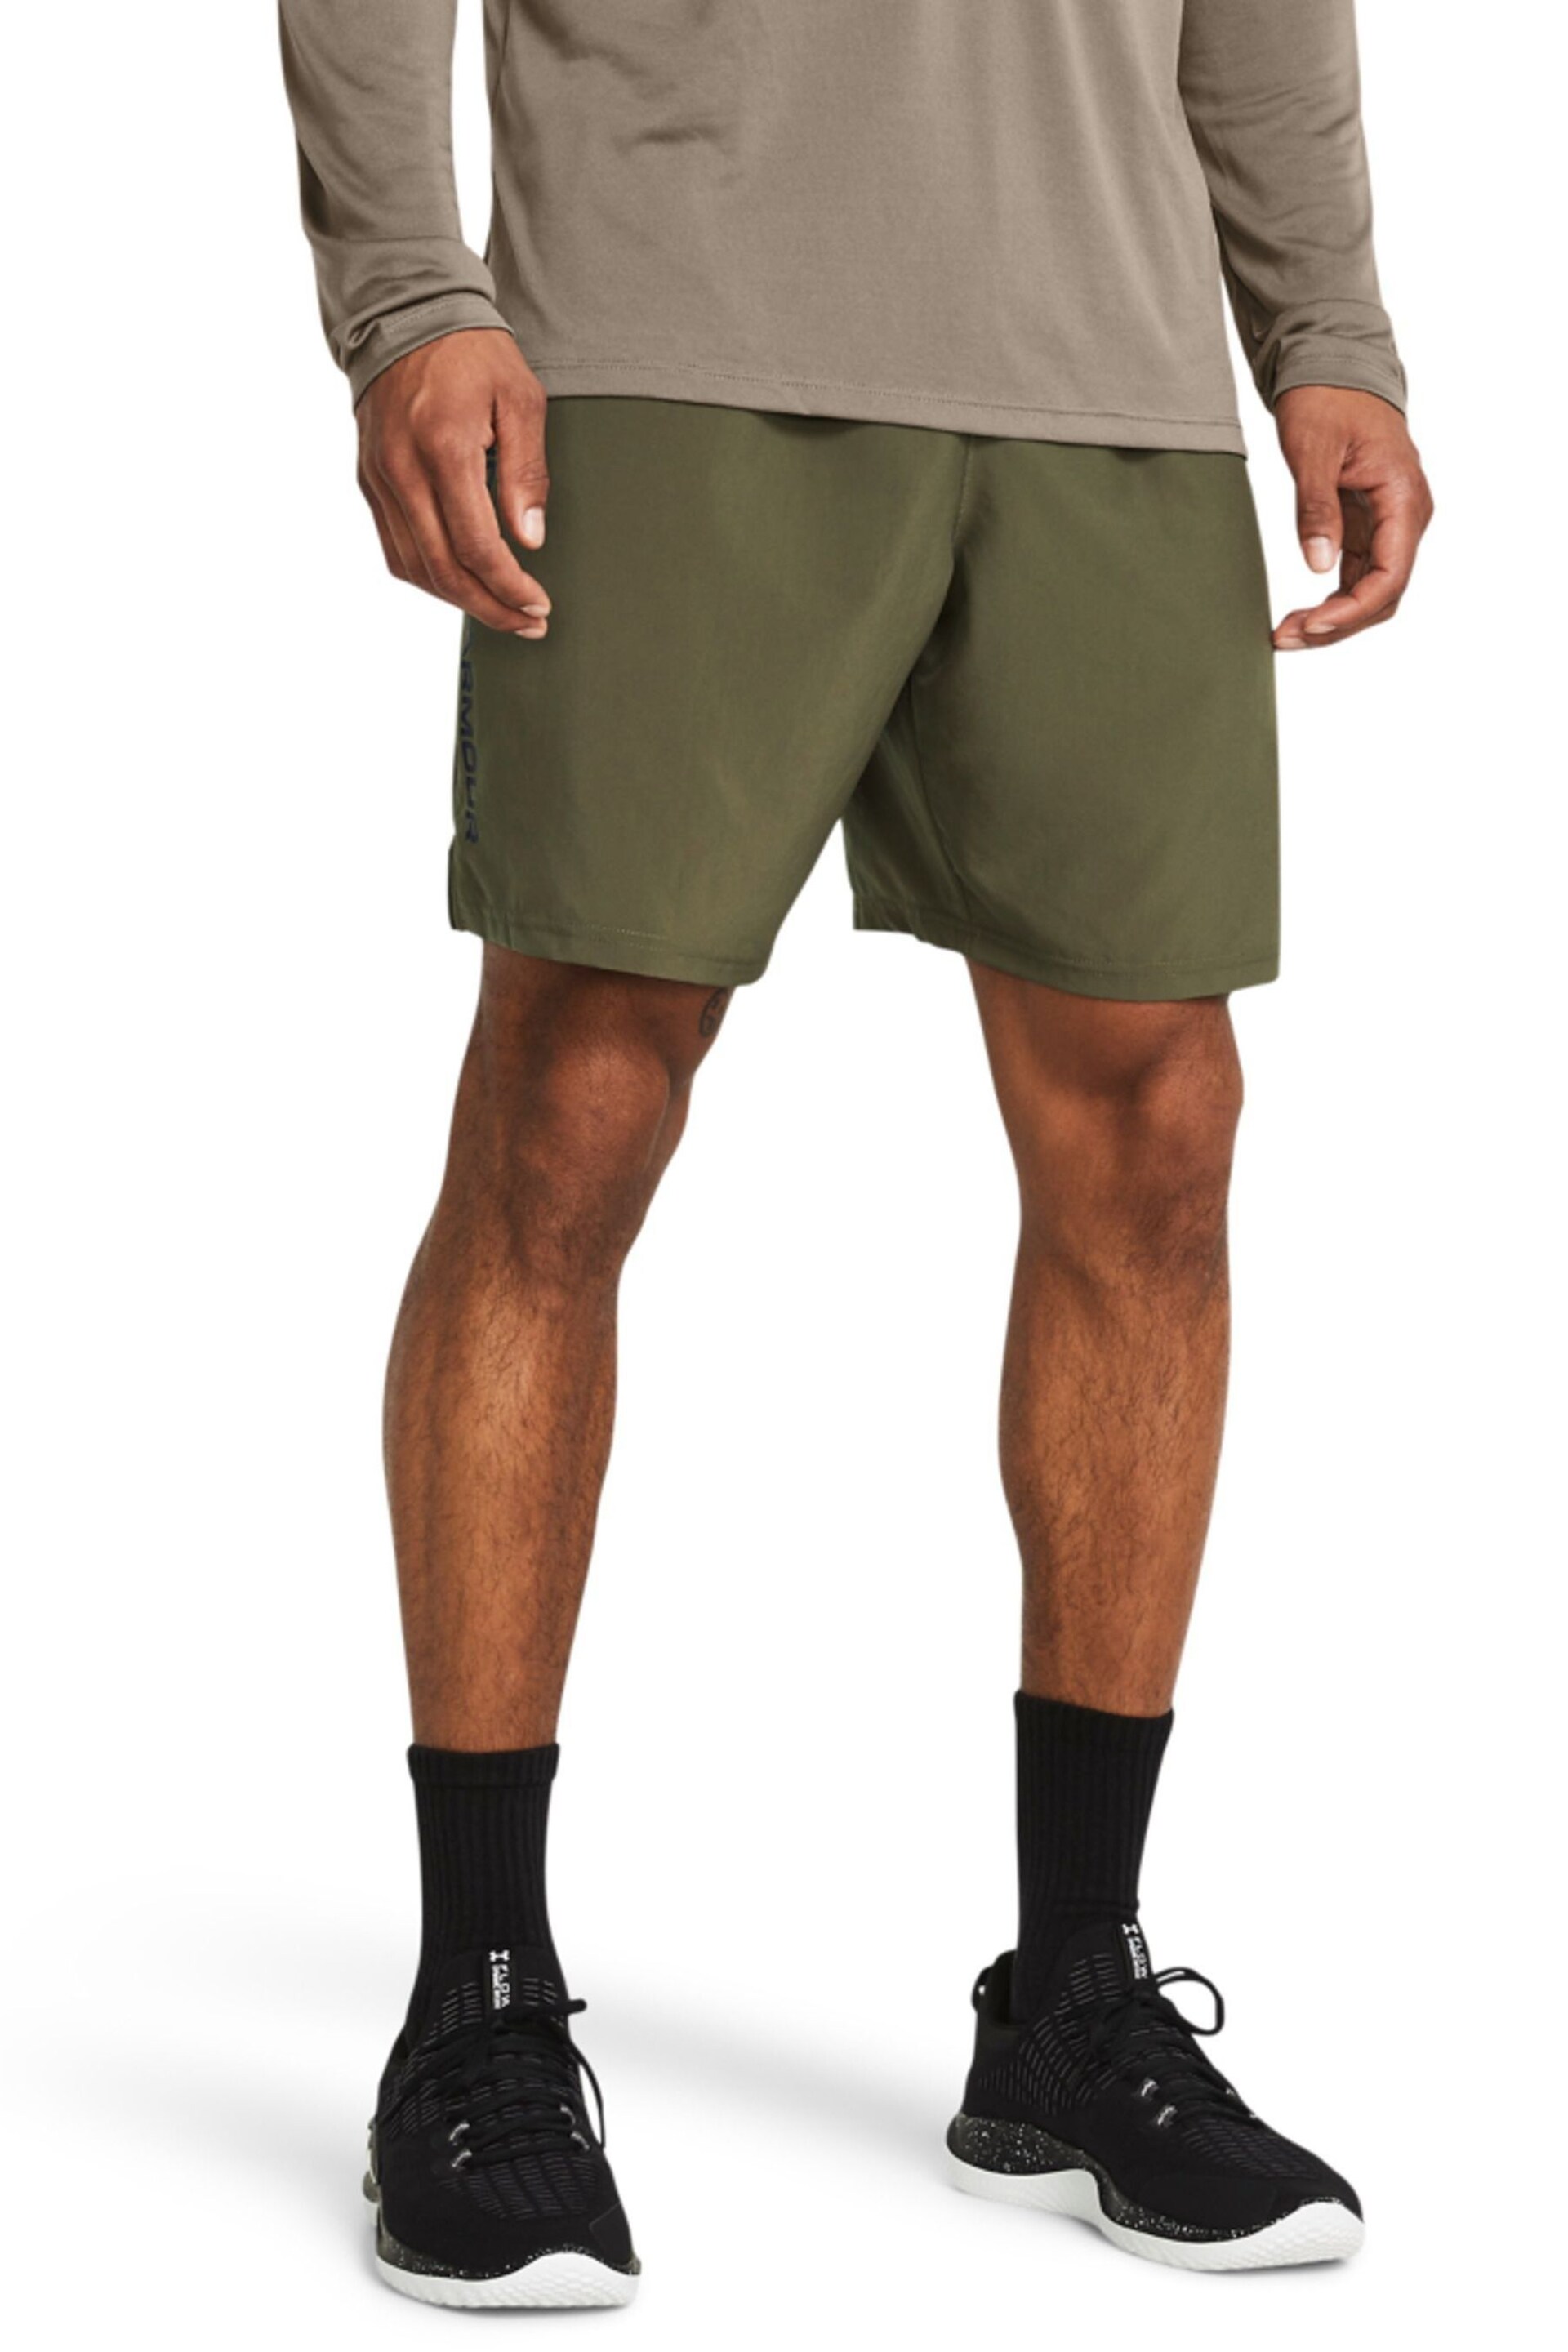 Under Armour Green Under Armour Green Woven Wordmark Shorts - Image 1 of 4